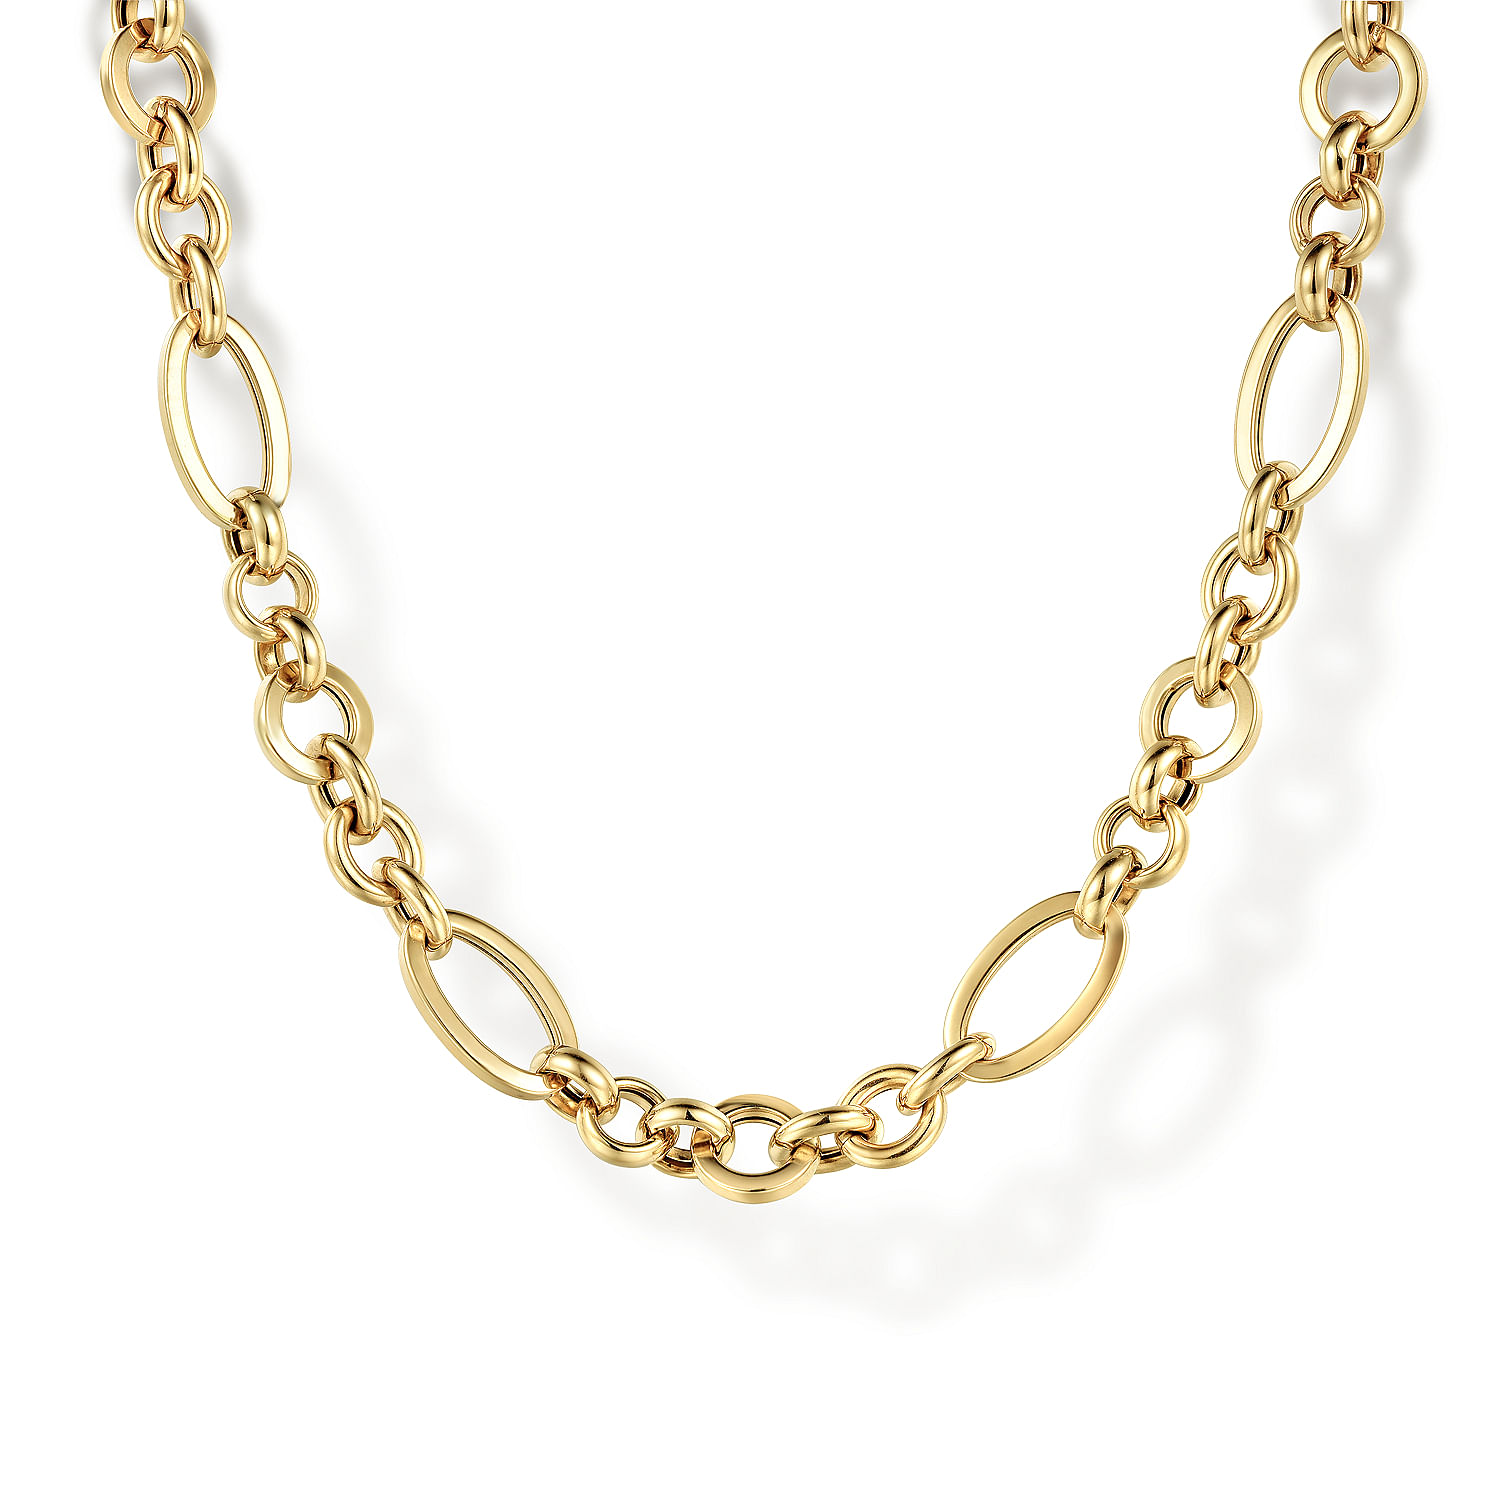 32 Inch 14K Yellow Gold Hollow Figaro Link Chain Necklace